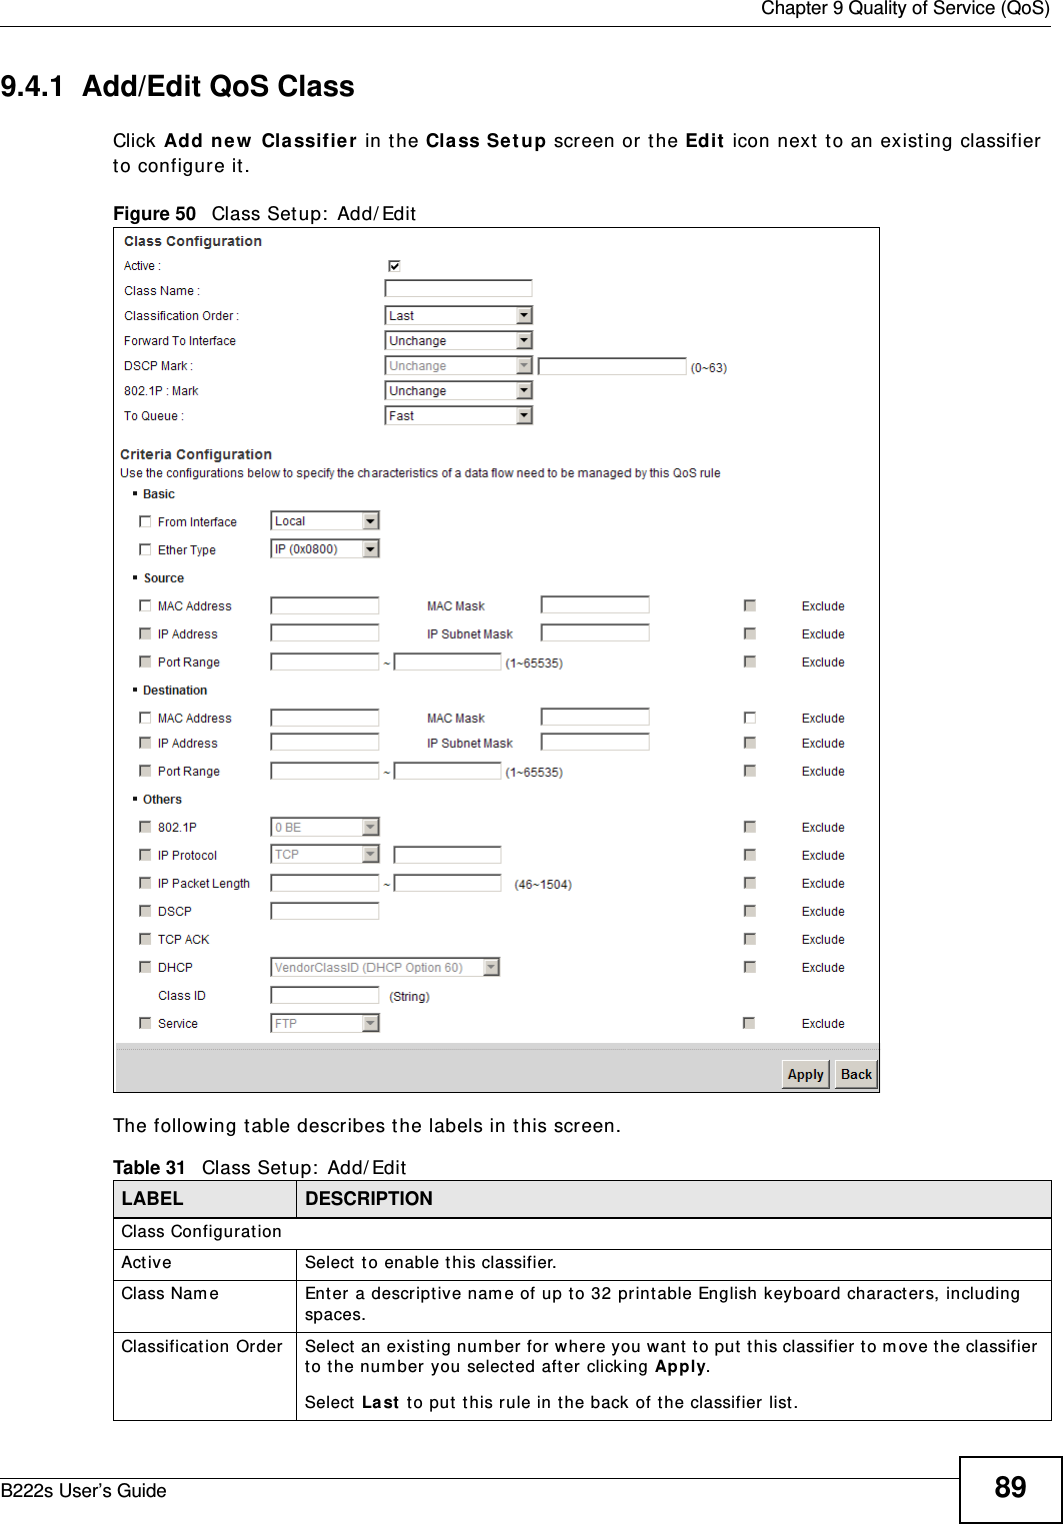  Chapter 9 Quality of Service (QoS)B222s User’s Guide 899.4.1  Add/Edit QoS Class Click Add new  Classifie r in the Cla ss Set up screen or t he Edit  icon next  t o an existing classifier to configure it .Figure 50   Class Setup:  Add/ EditThe following t able describes t he labels in t his screen.  Table 31   Class Set up:  Add/ EditLABEL DESCRIPTIONClass Configurat ionAct ive Select t o enable t his classifier.Class Nam e Enter a descript ive nam e of up to 32 print able English keyboard charact ers, including spaces.Classification Order Select  an exist ing num ber for where you want  t o put  this classifier t o m ove t he classifier to t he num ber you select ed aft er clicking Apply.Select  La st  to put  t his rule in t he back of t he classifier list .